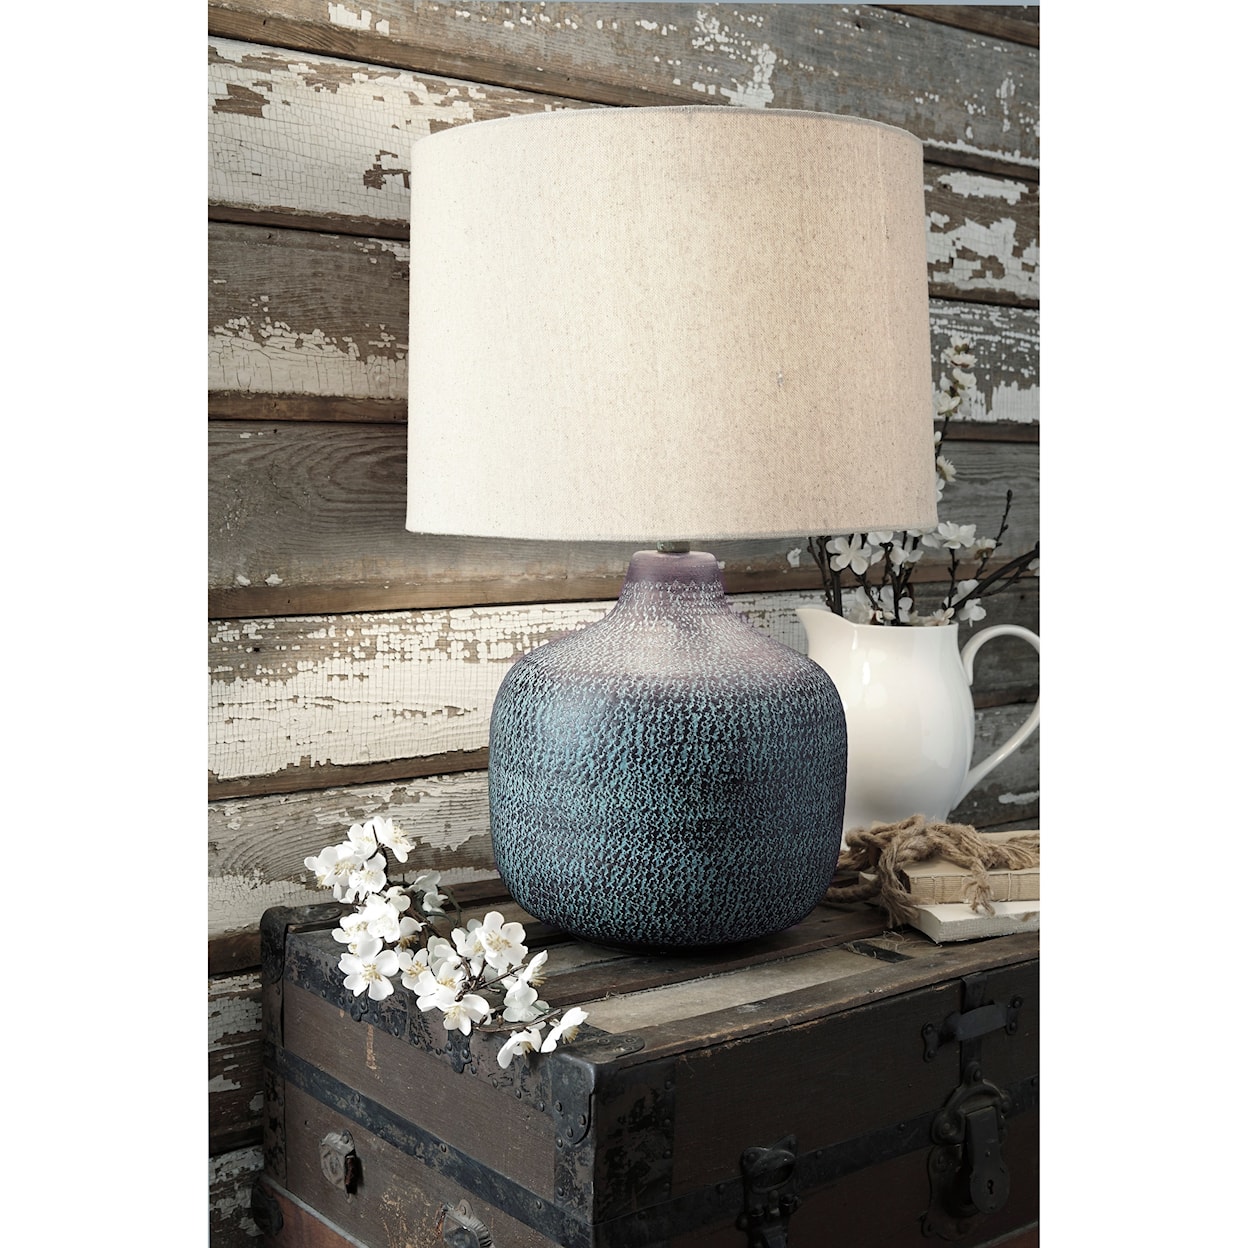 Ashley Furniture Signature Design Lamps - Casual Malthace Patina Metal Table Lamp